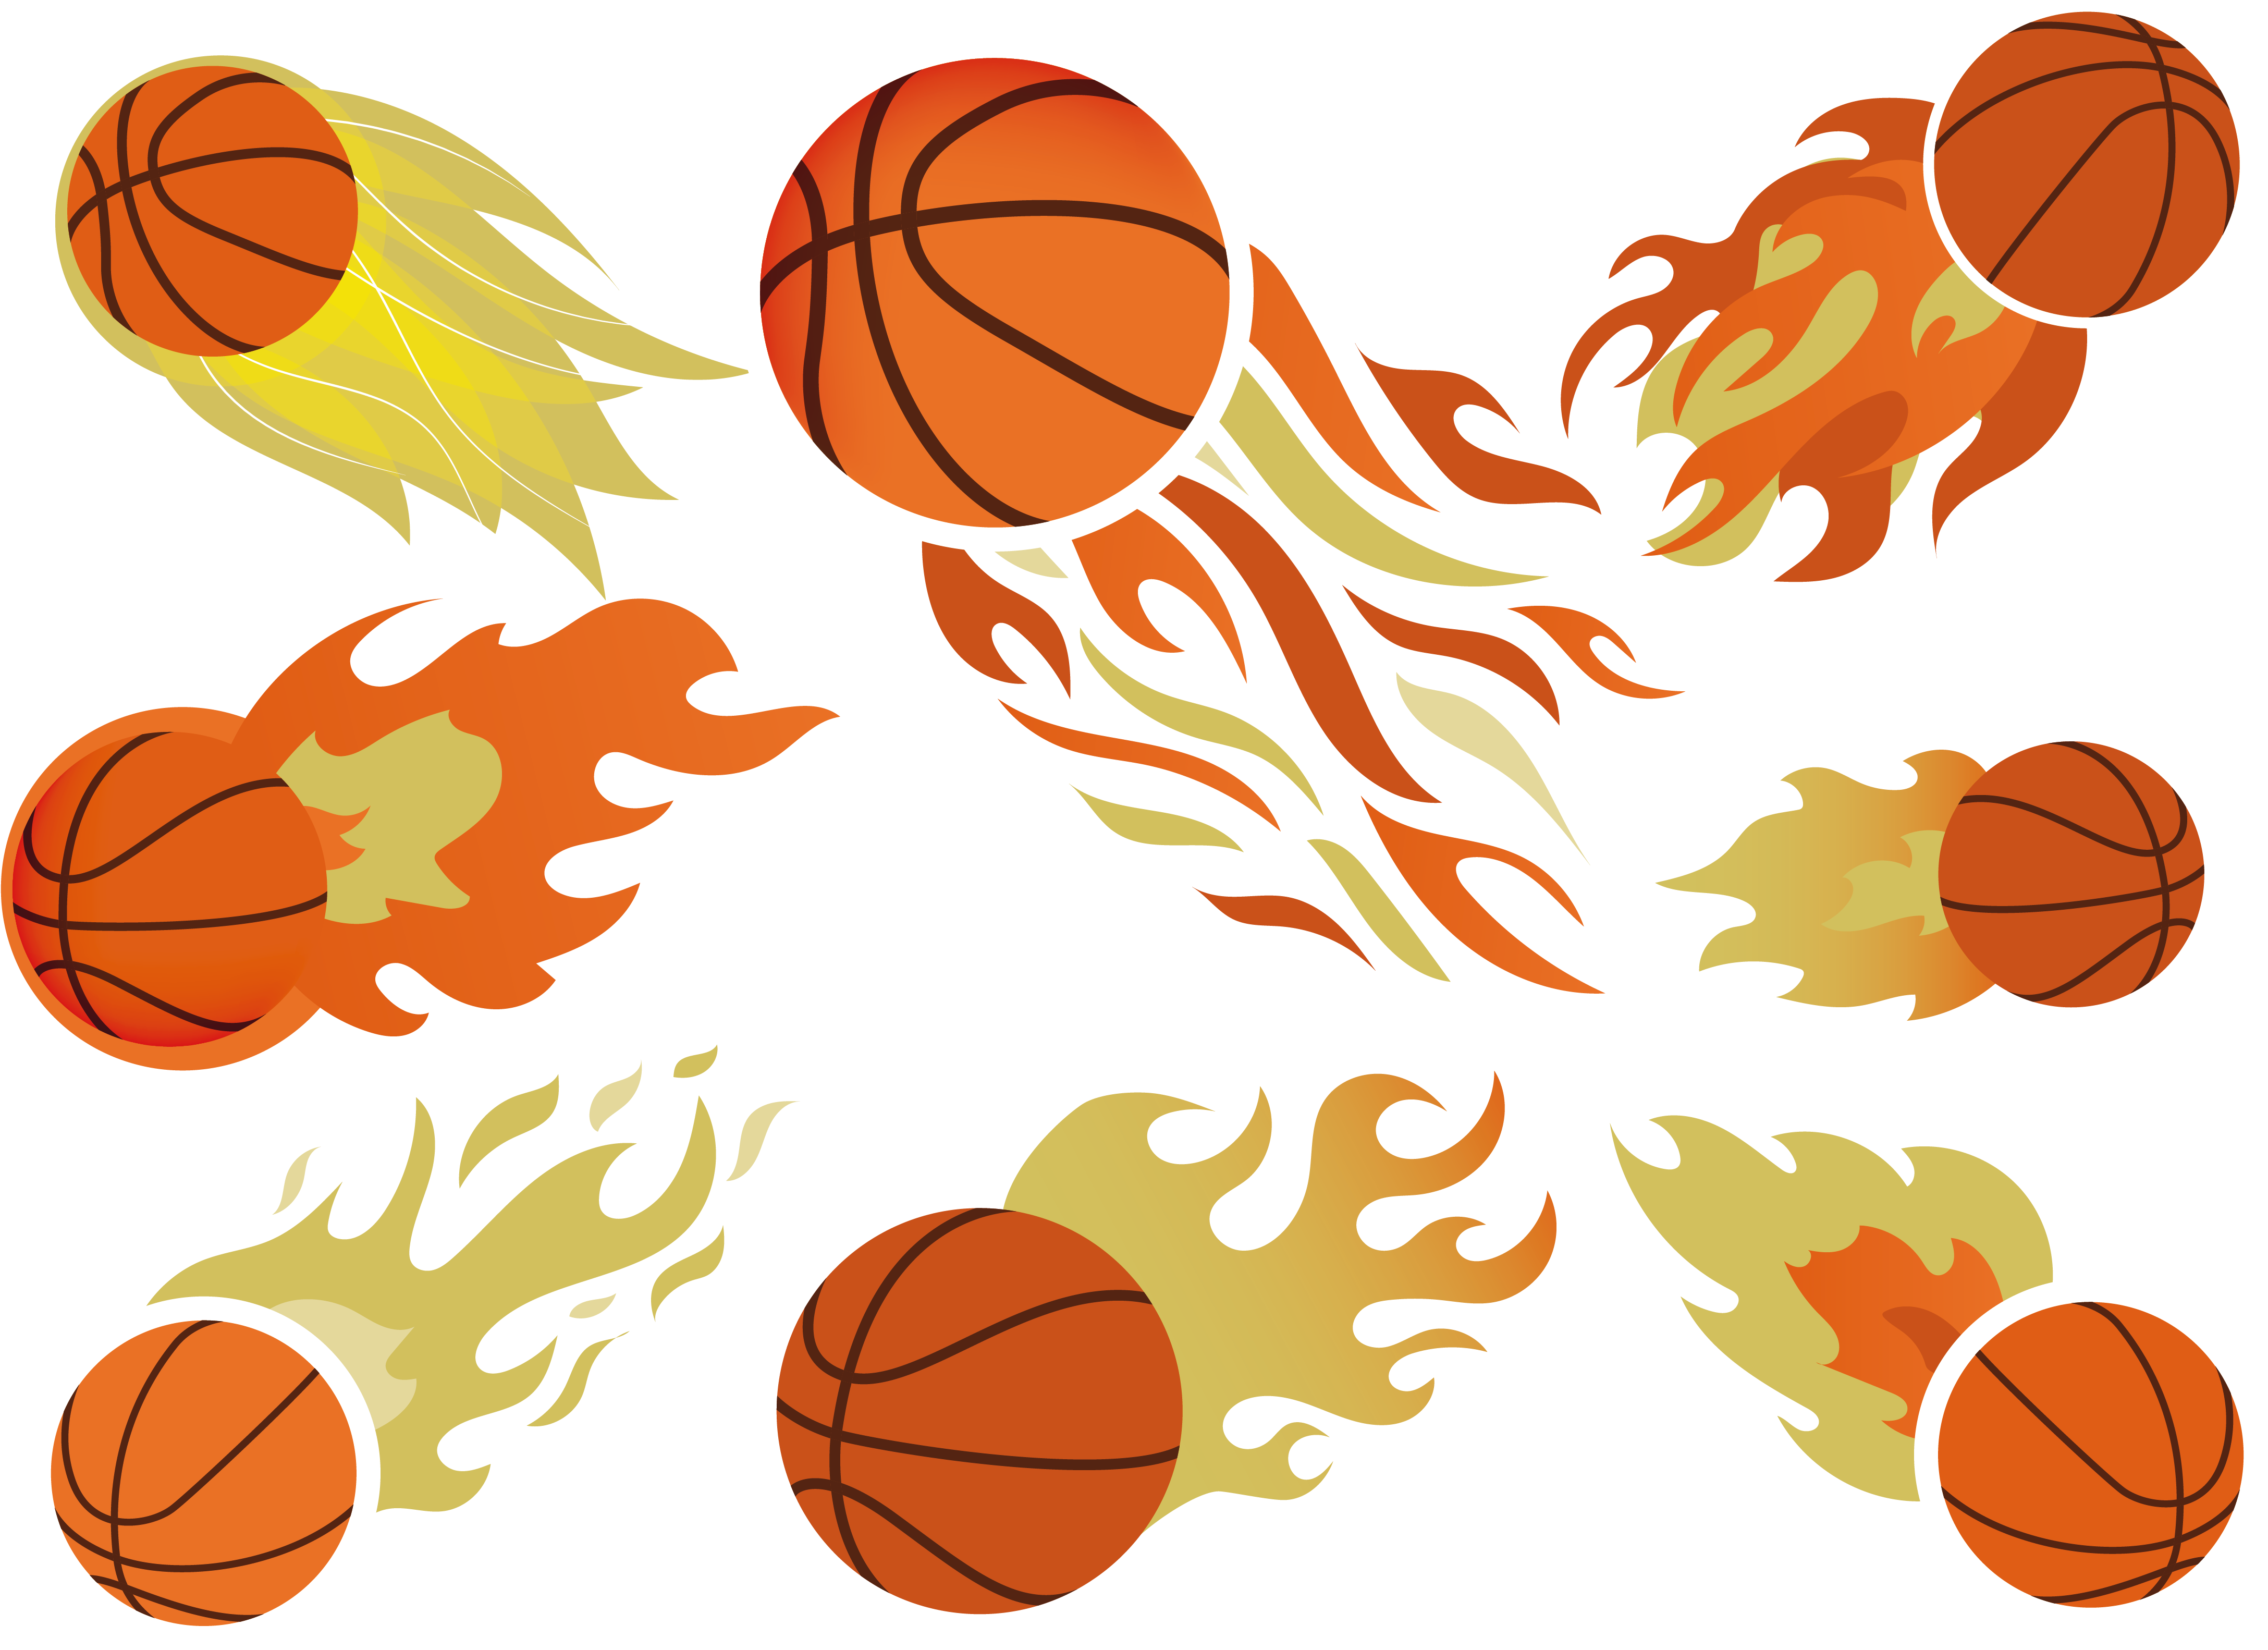 A Basketballs With Flames On A Black Background